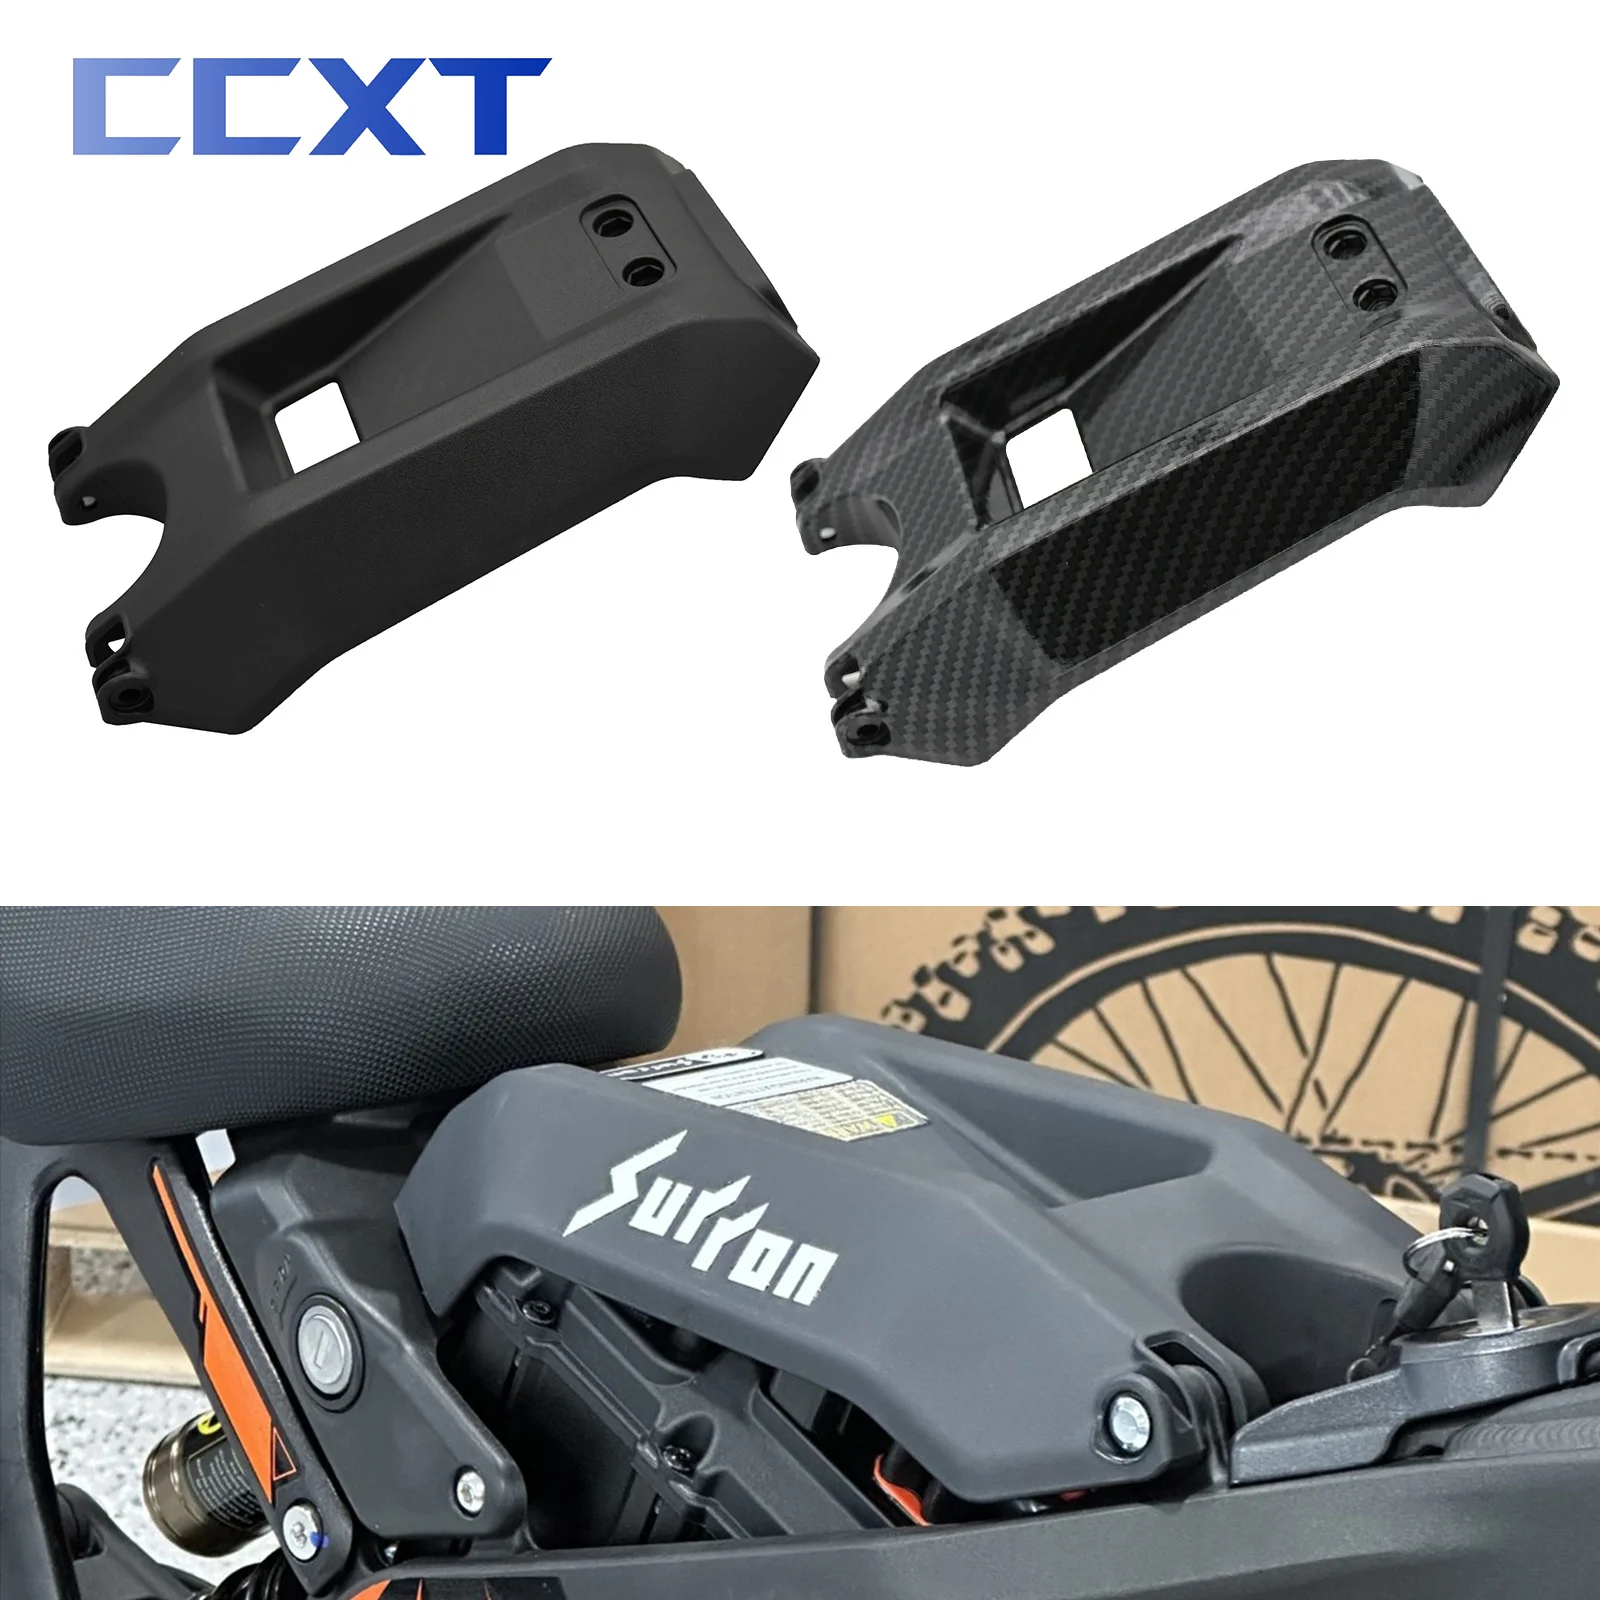 Motorcycle Accessories Battery Cover Guard Electric Bike For Sur-Ron Surron Light Bee S & Light Bee X For Segway X260 X160 Parts